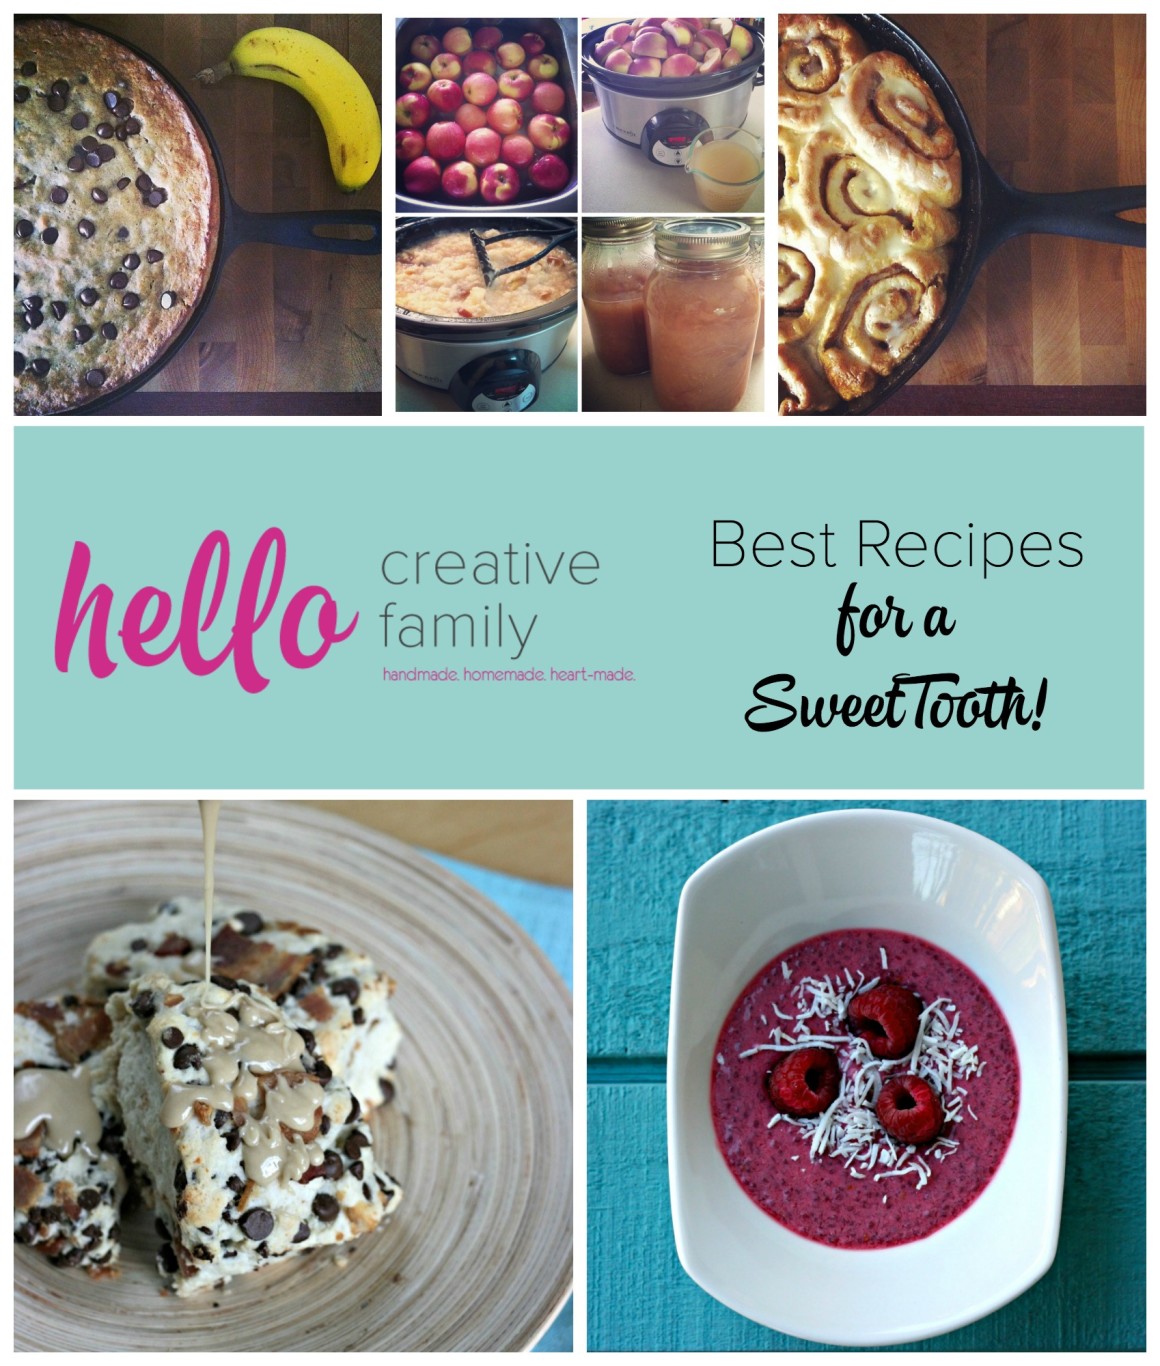 Hello Creative Family Best Recipes for a Sweet Tooth